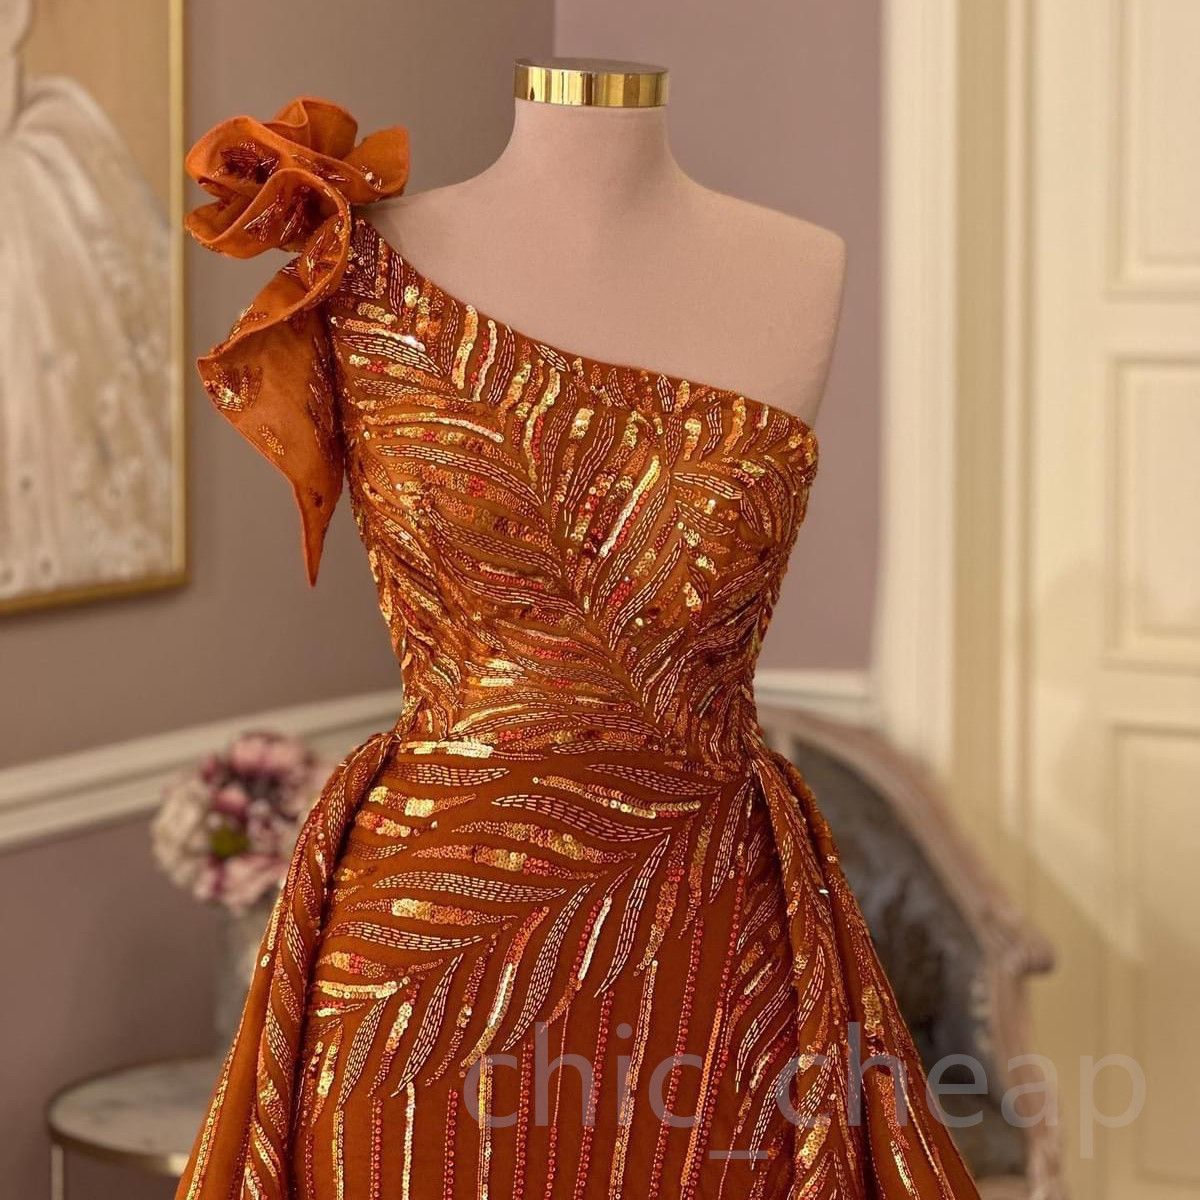 2023 Aso Ebi Orange Sheath Prom Dress Sequined Lace Evening Formal Party Second Reception Birthday Bridesmaid Engagement Gowns Dresses Robe De Soiree ZJ647